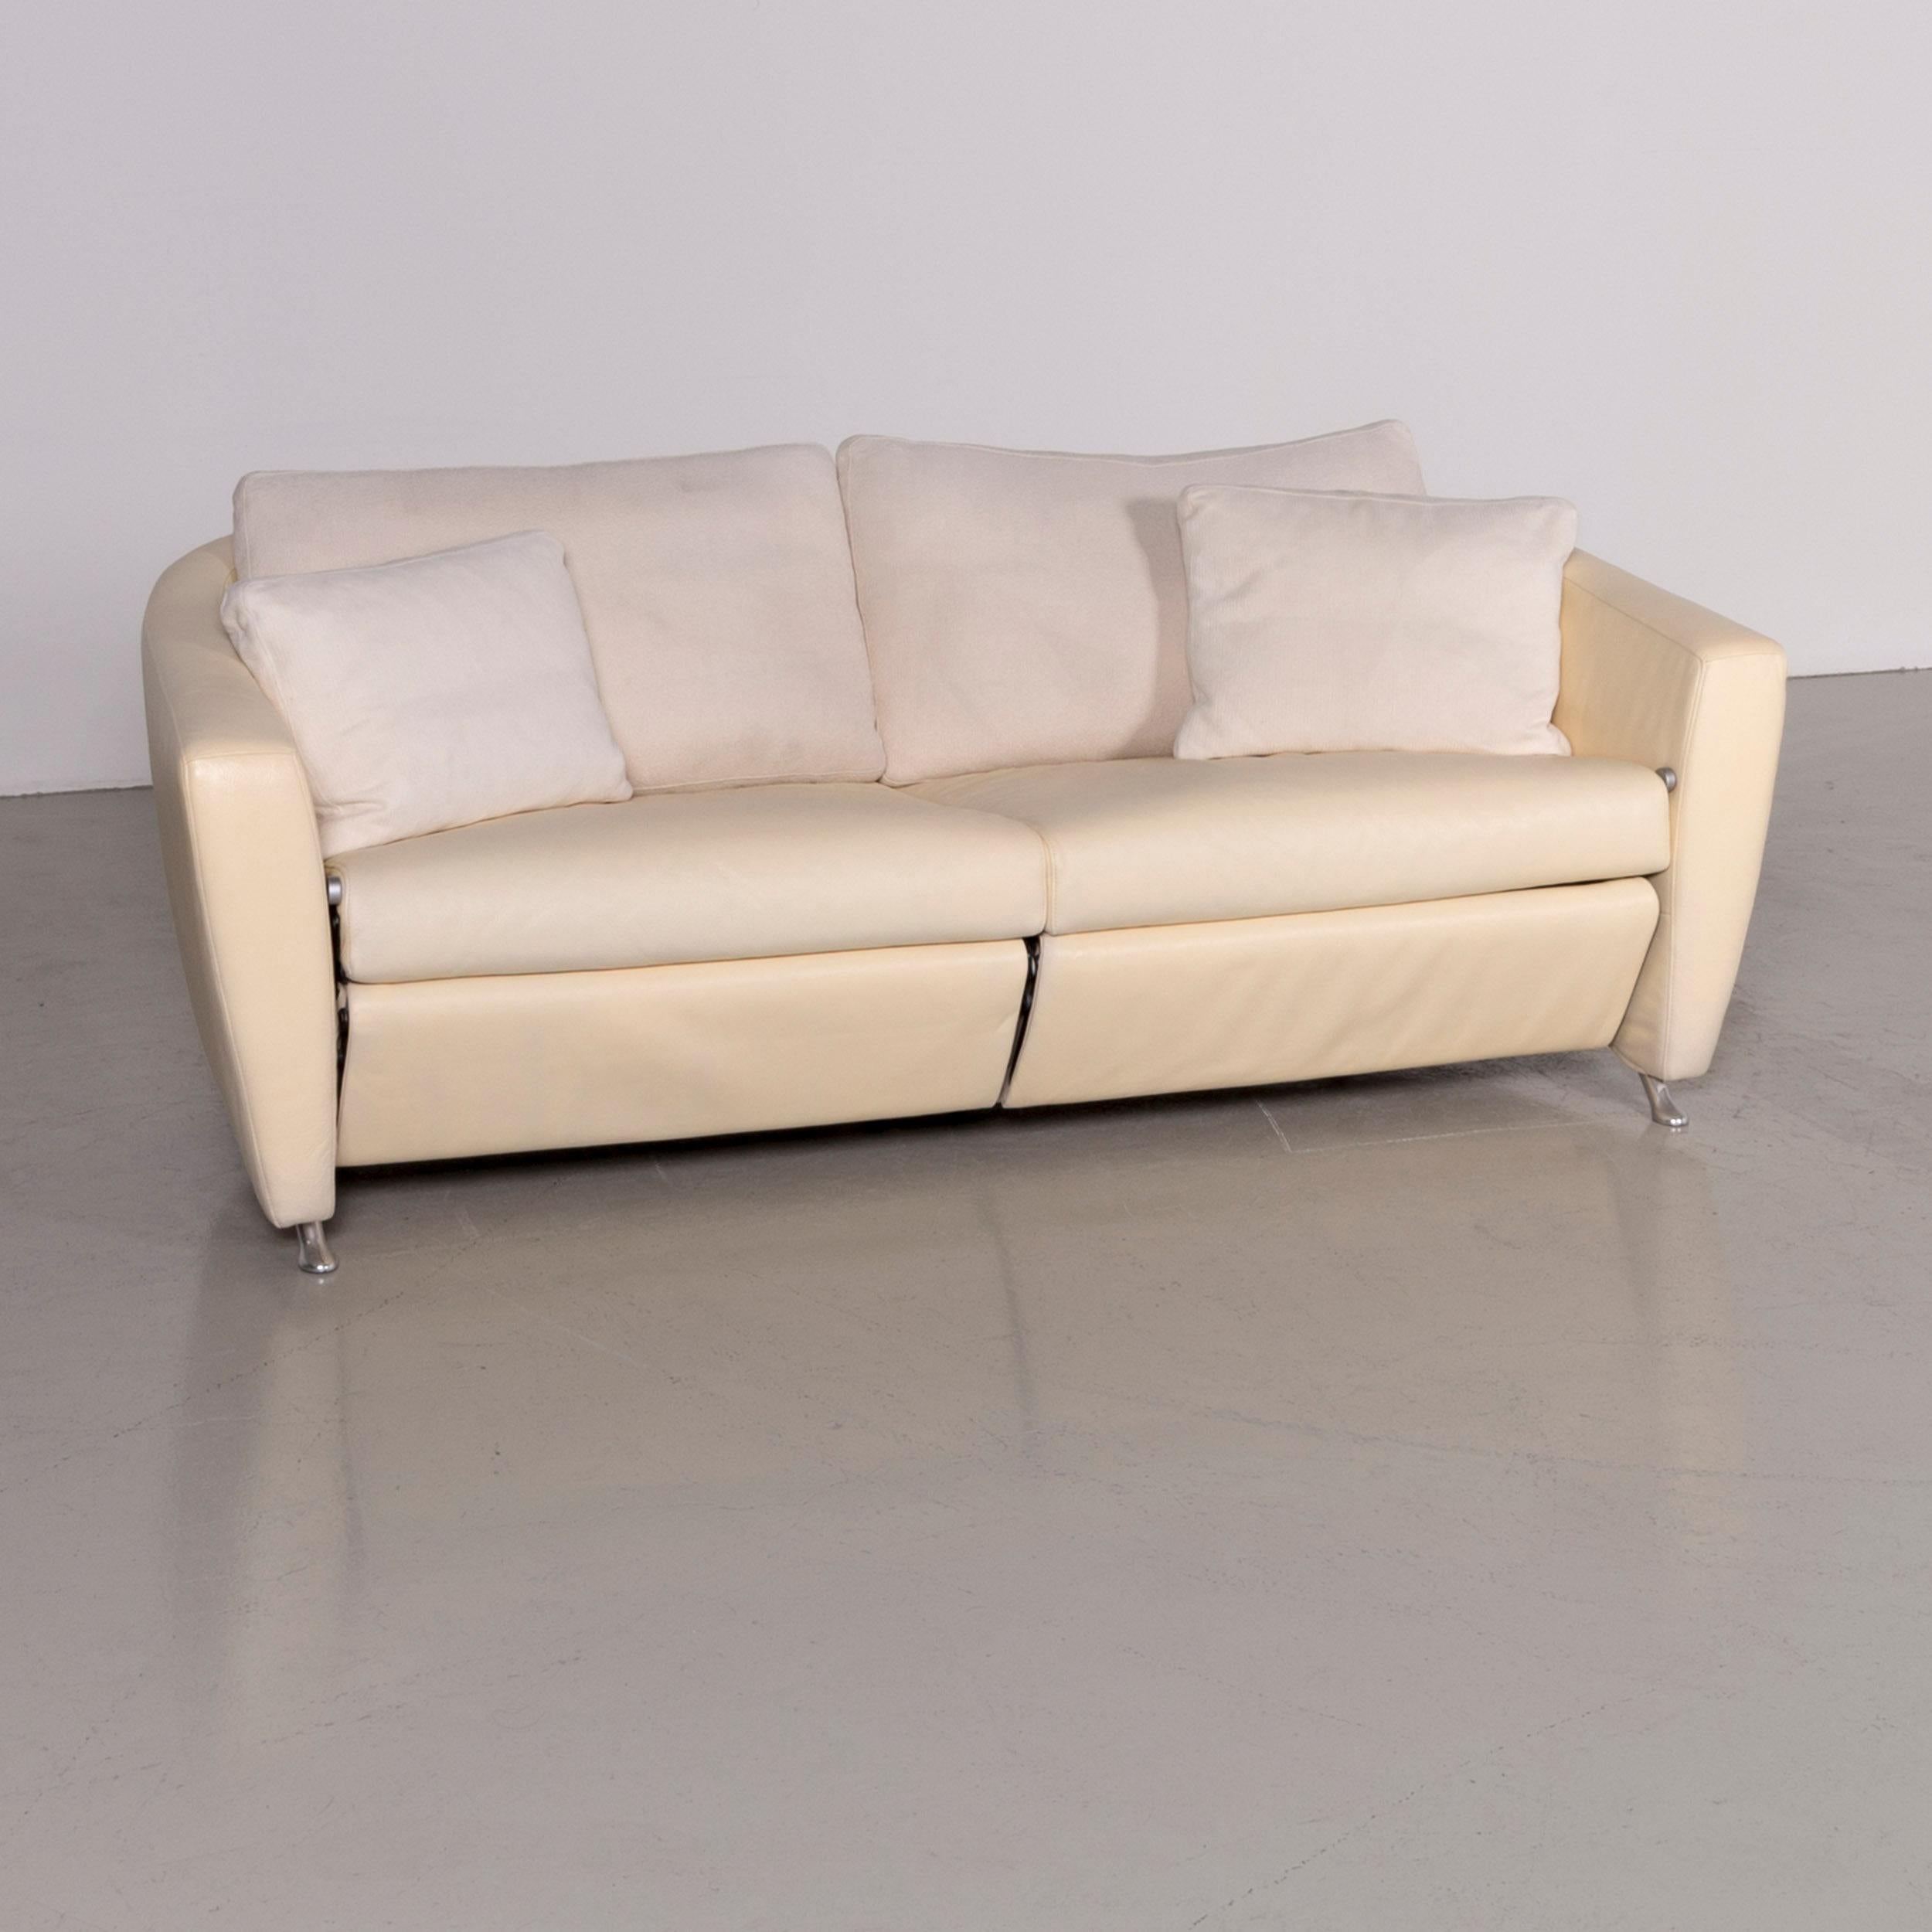 We bring to you an FSM Sesam leather sofa off-white two-seat function.